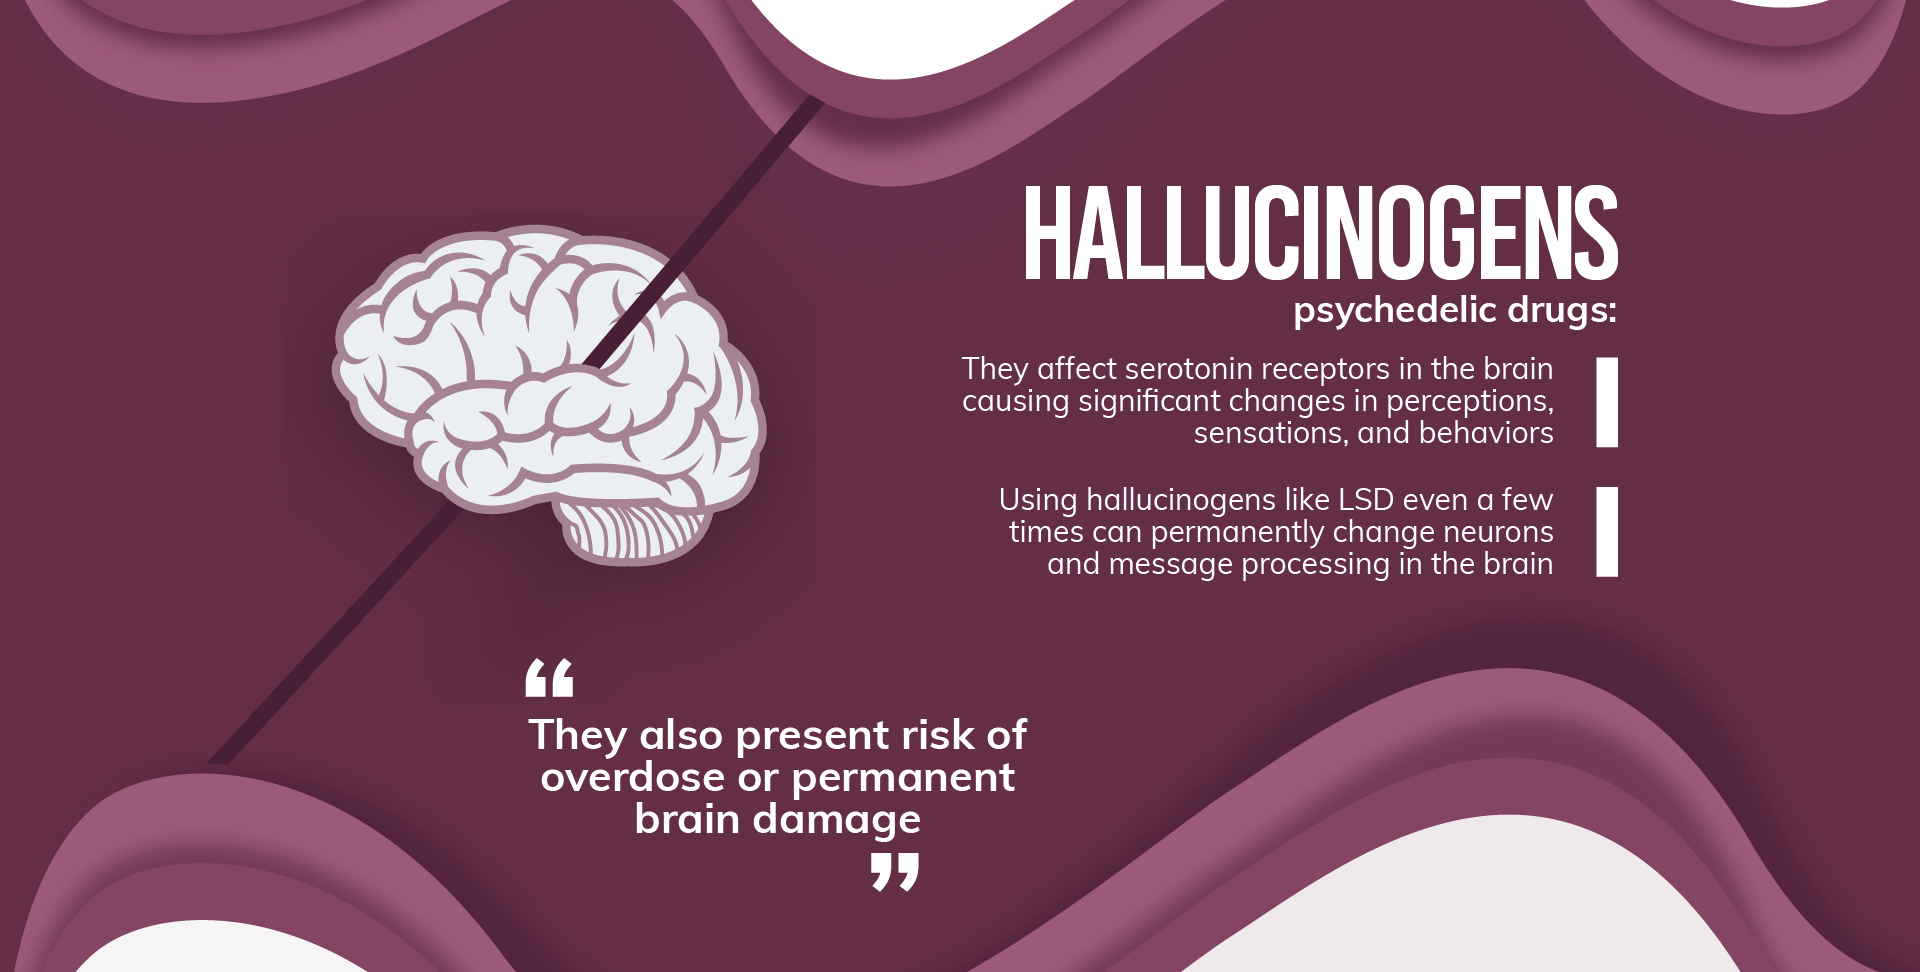 Hallucinogens are psychedelic drugs, they affect serotonin receptors in the brain causing significant changes in perceptions, sensations andbehaviors, using hallucinogens like LSD even a few times can permanently change neurons and message processing in the brain, hallucinogens alsopresent risk of overdose or permanent brain damage0